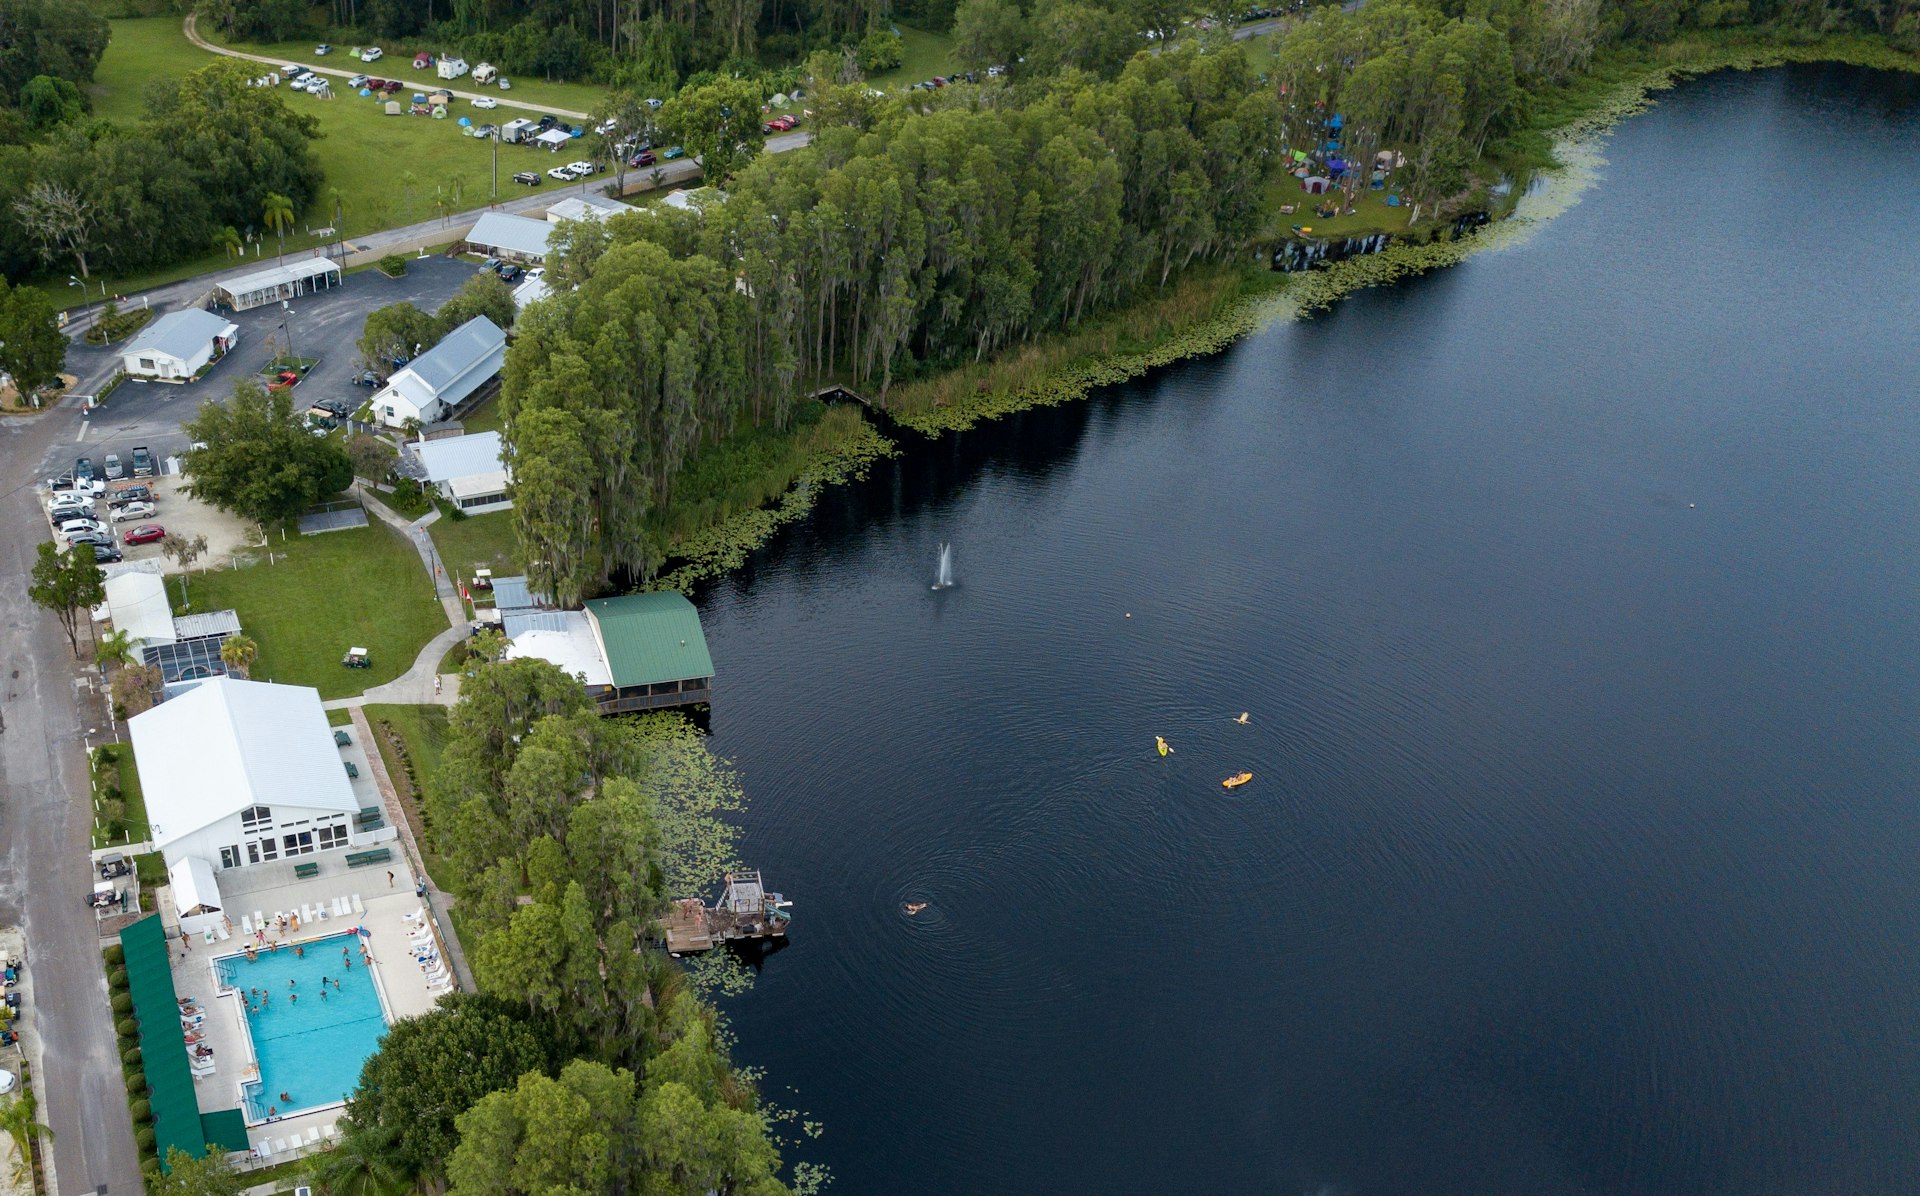 An aerial shot of the Lake Como Resort in Florida. On the left side of the frame, a light blue pool contrasts with the dark blue lake that takes up most of the photo. Tiny peach dots are nude swimmers. The white buildings with metal roofs sprawl out around the lake, the shore lined thickly with green trees. A campground with colorful tents appears amongst the foliage and two orange kayaks at in the middle of the lake.